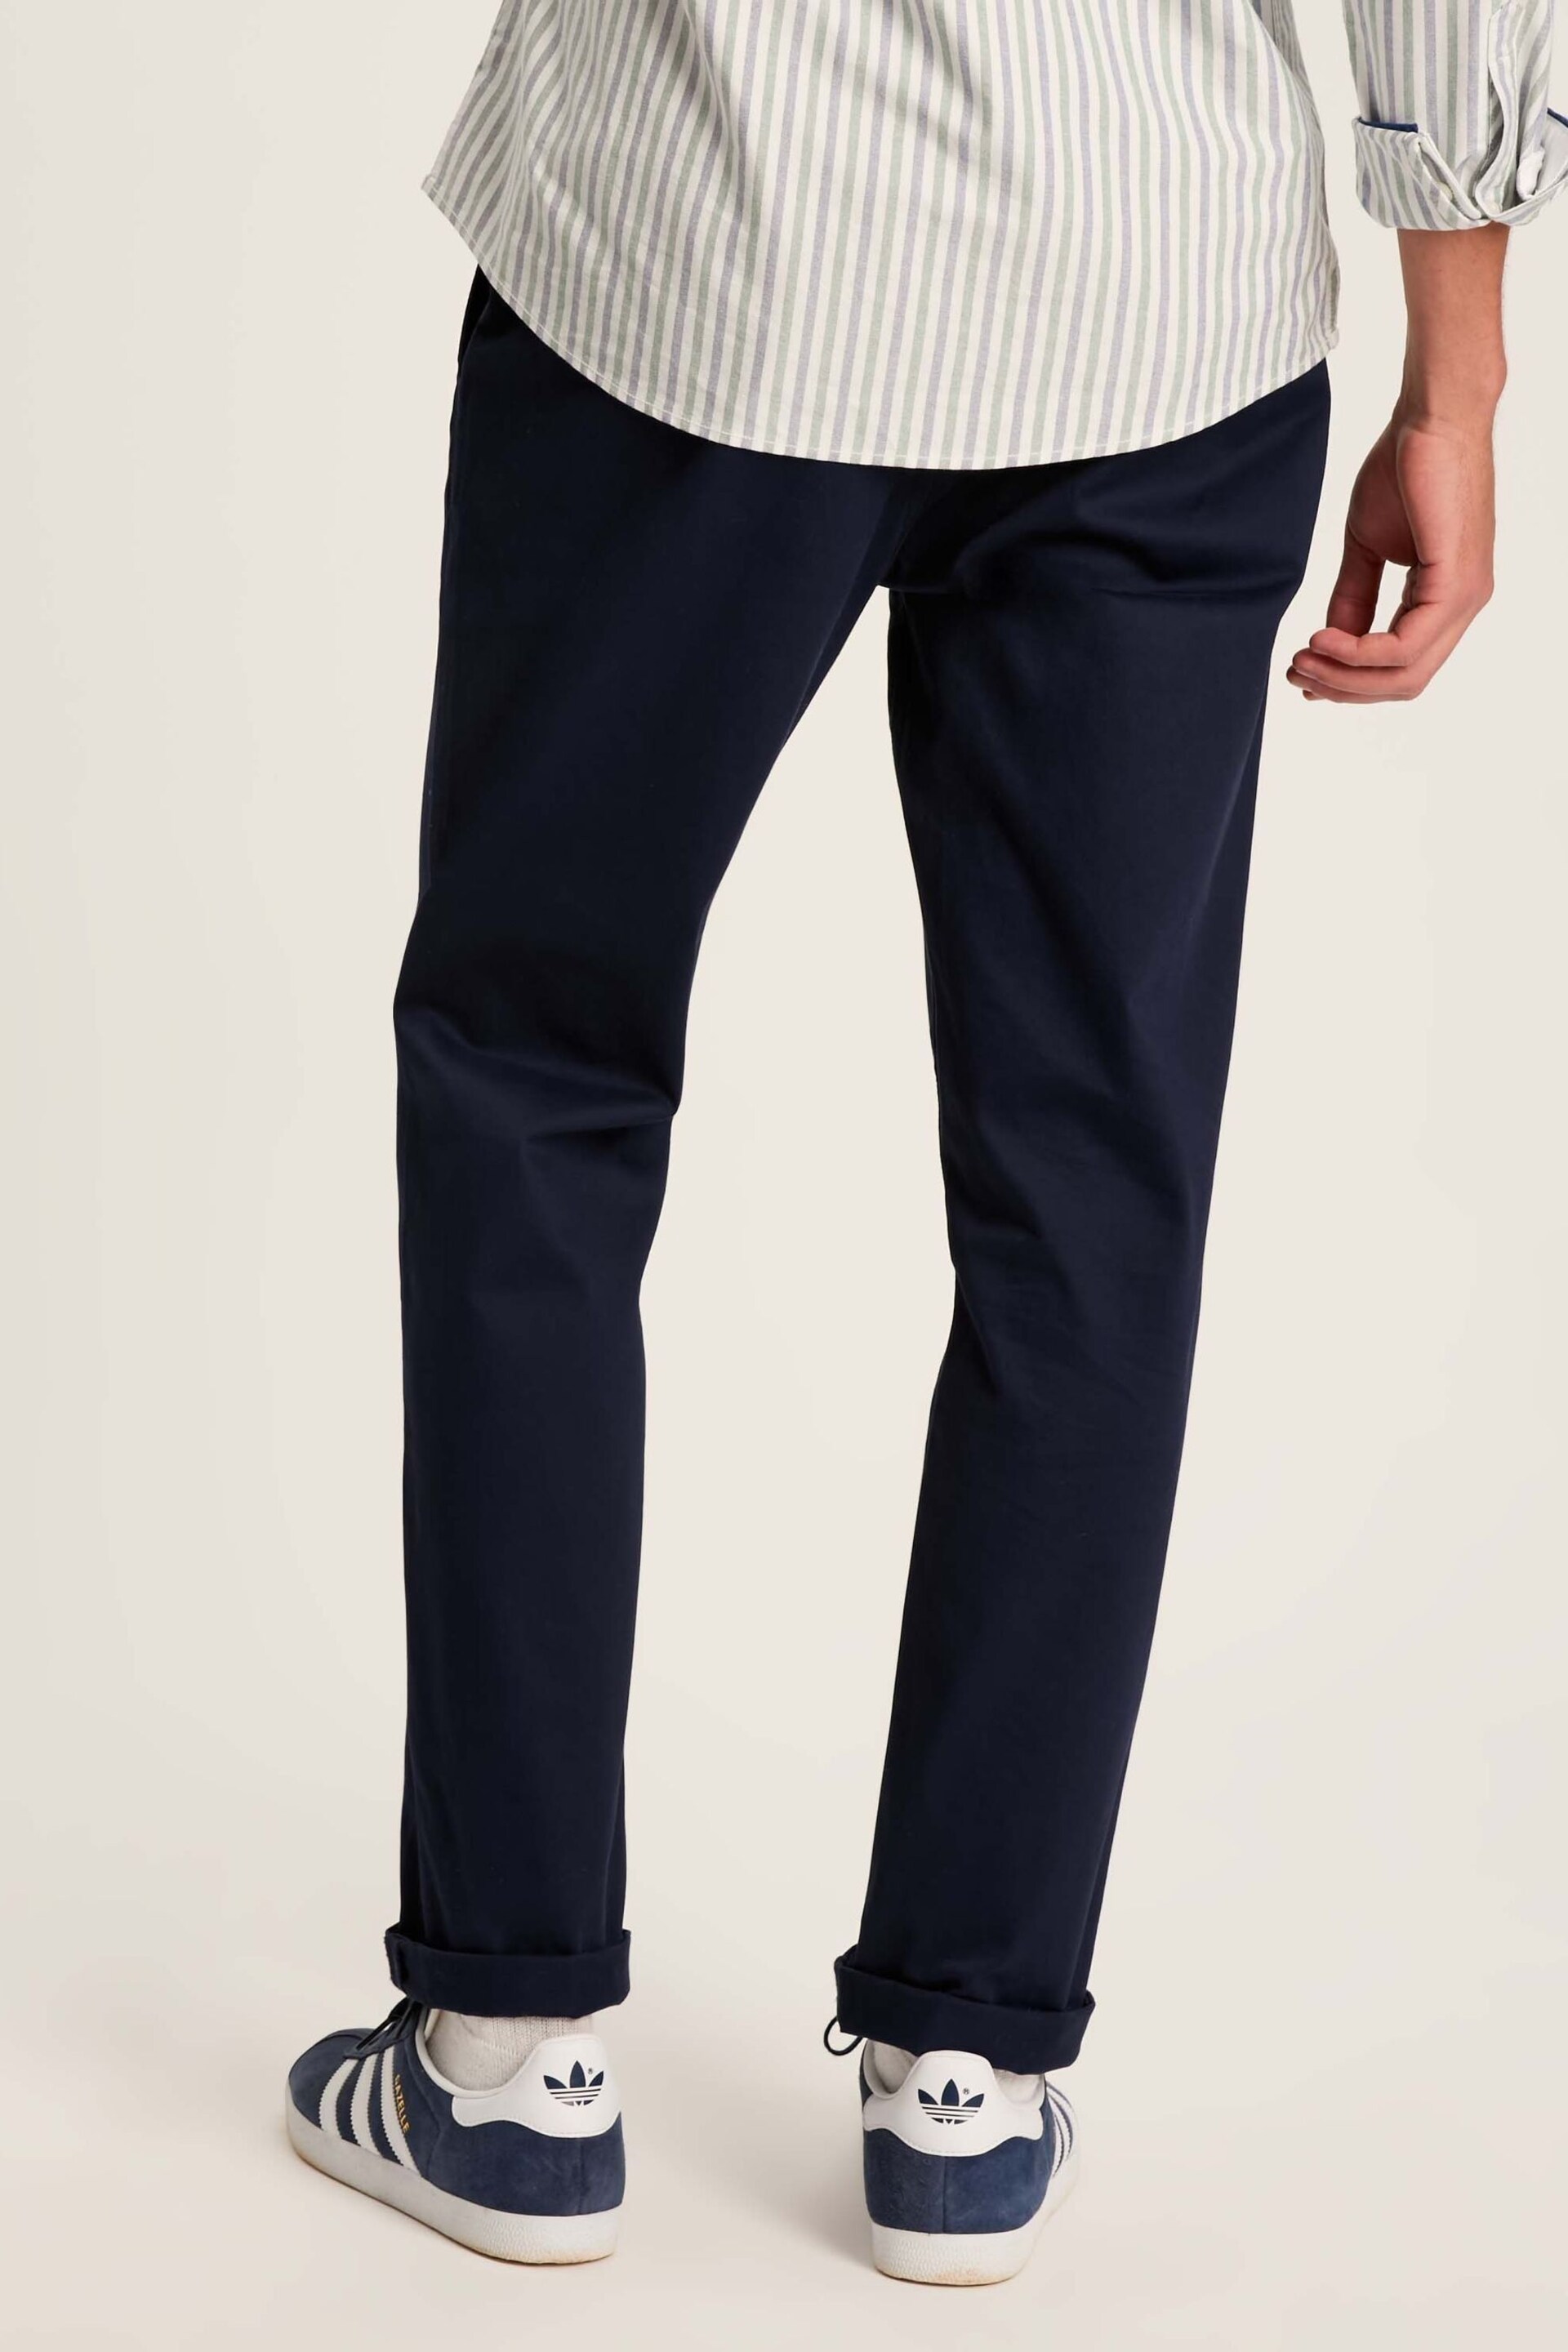 Joules Stamford Navy Blue Slim Fit Chinos - Image 2 of 6